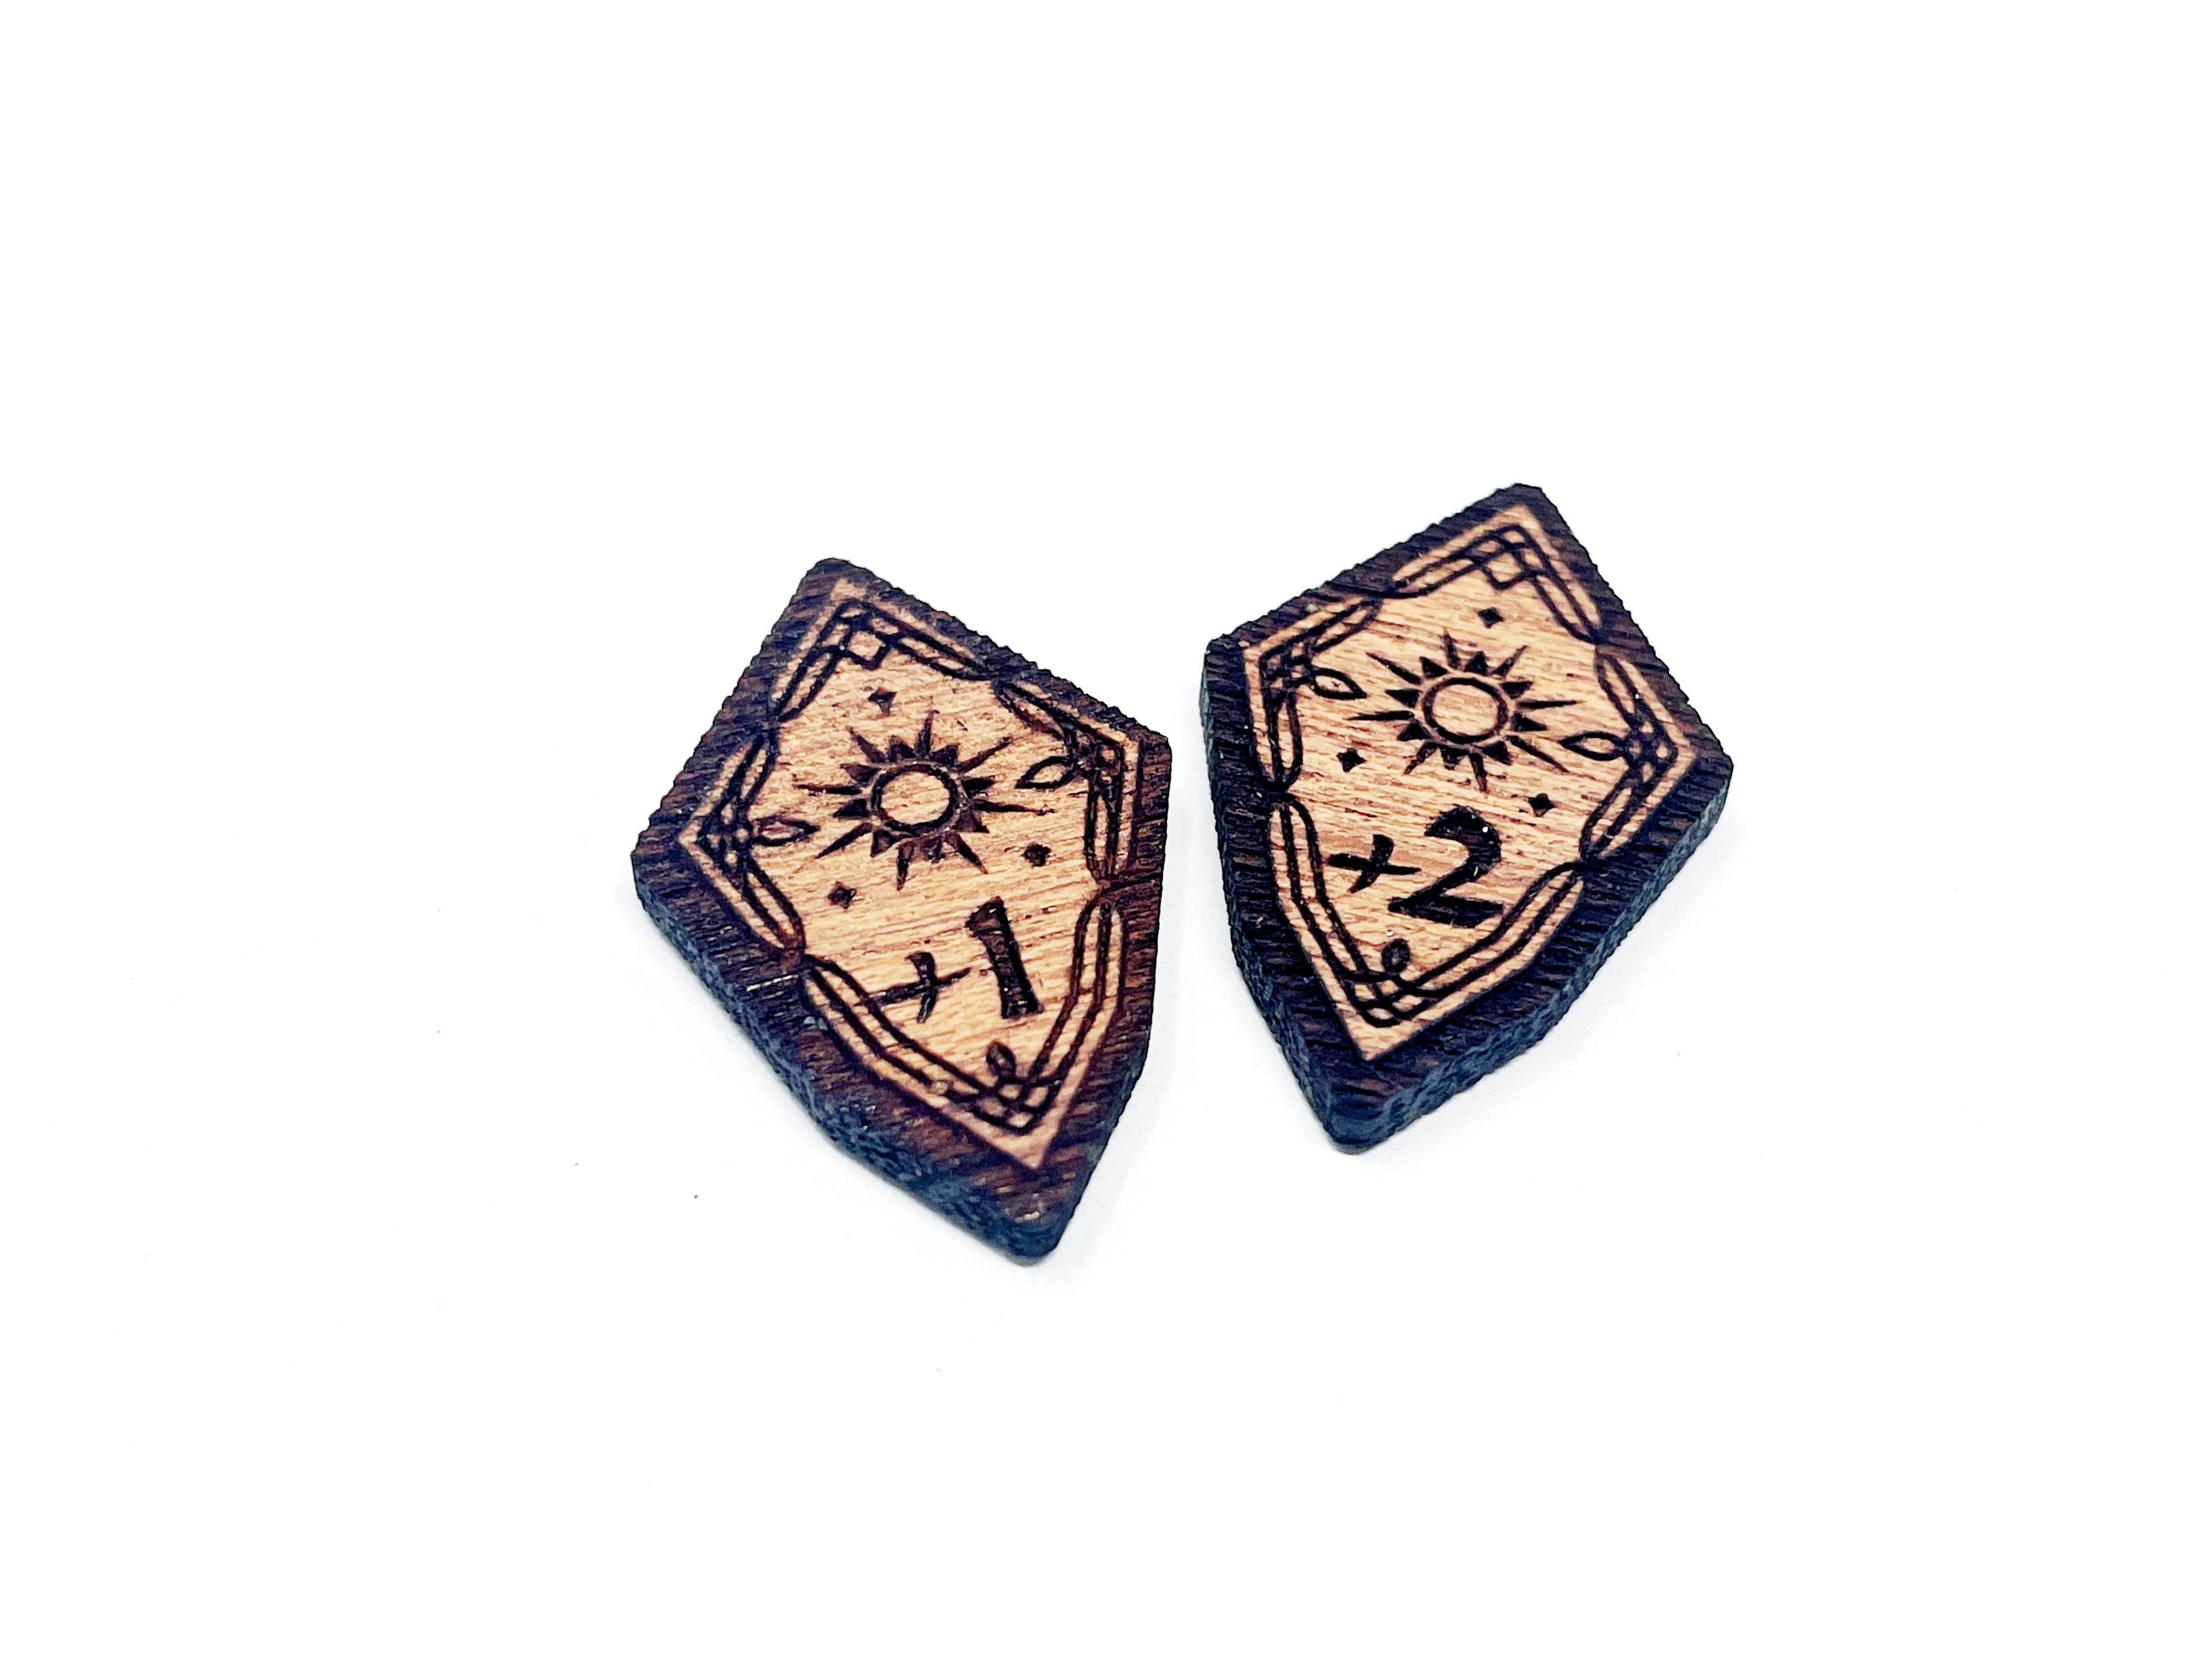 2 x Willpower 1/2 Stat Boost Modifier Tokens - Lord Of The Rings LCG, Solid Mahogany (double sided)